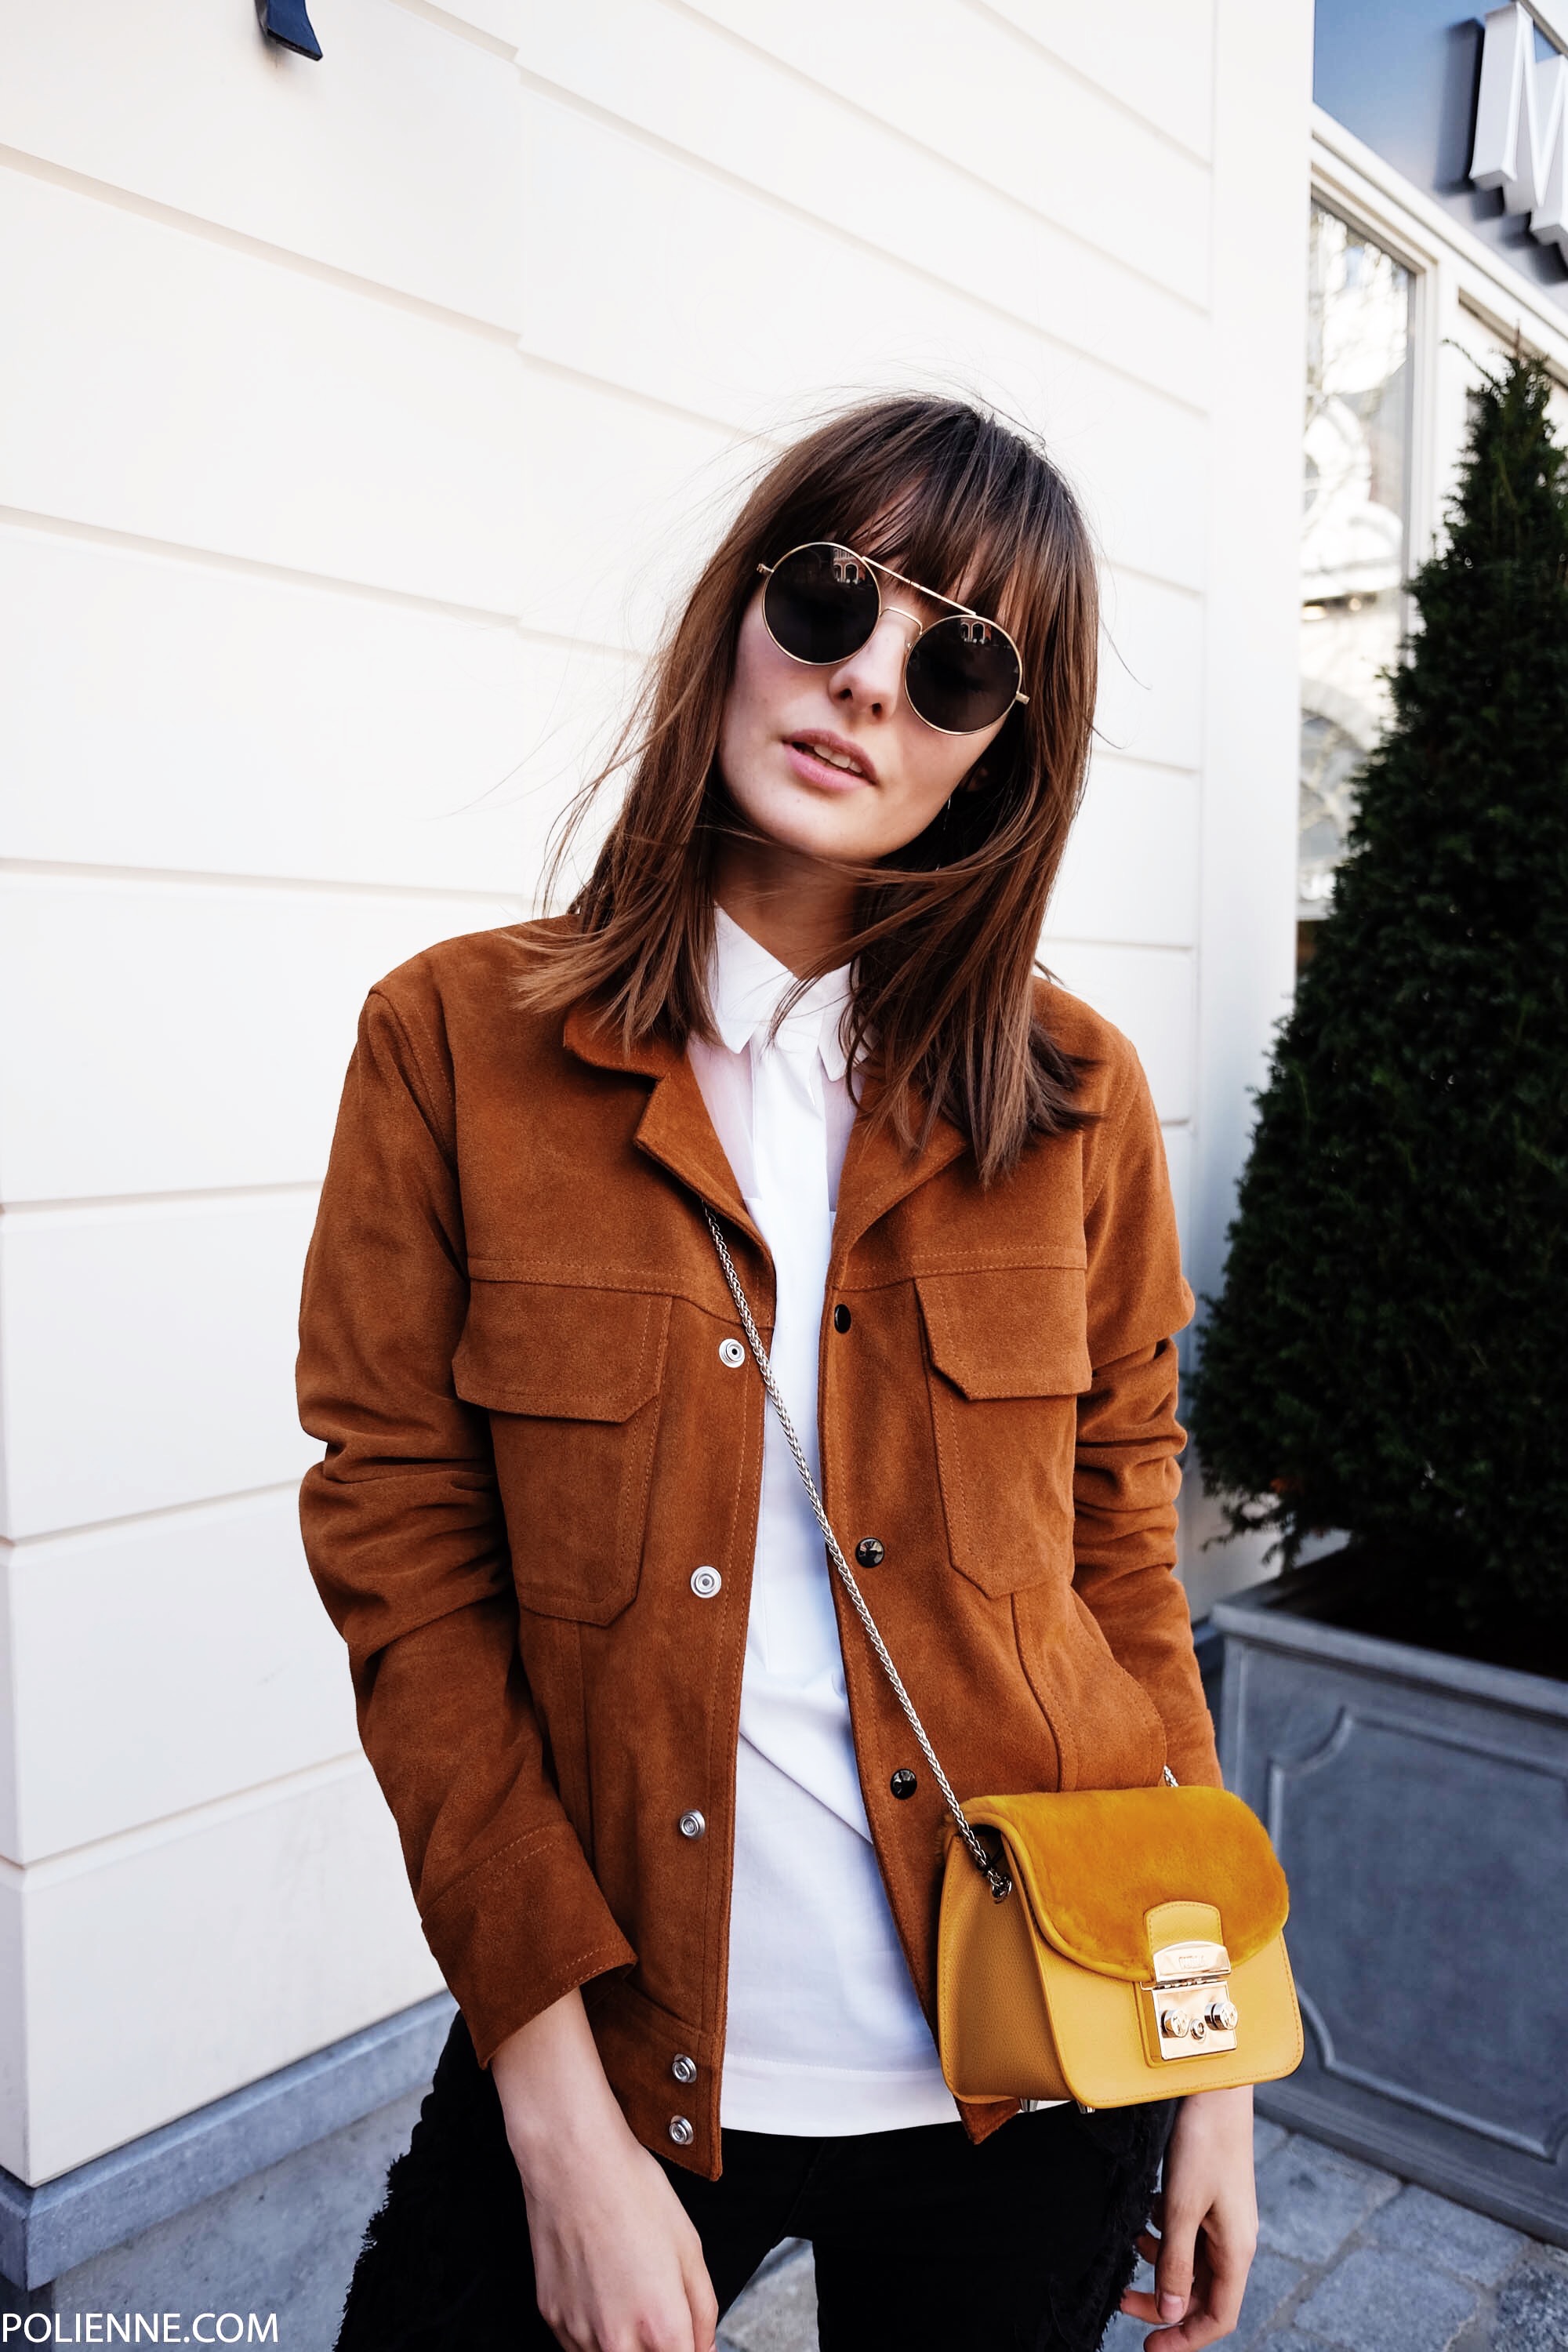 POLIENNE | a personal style diary